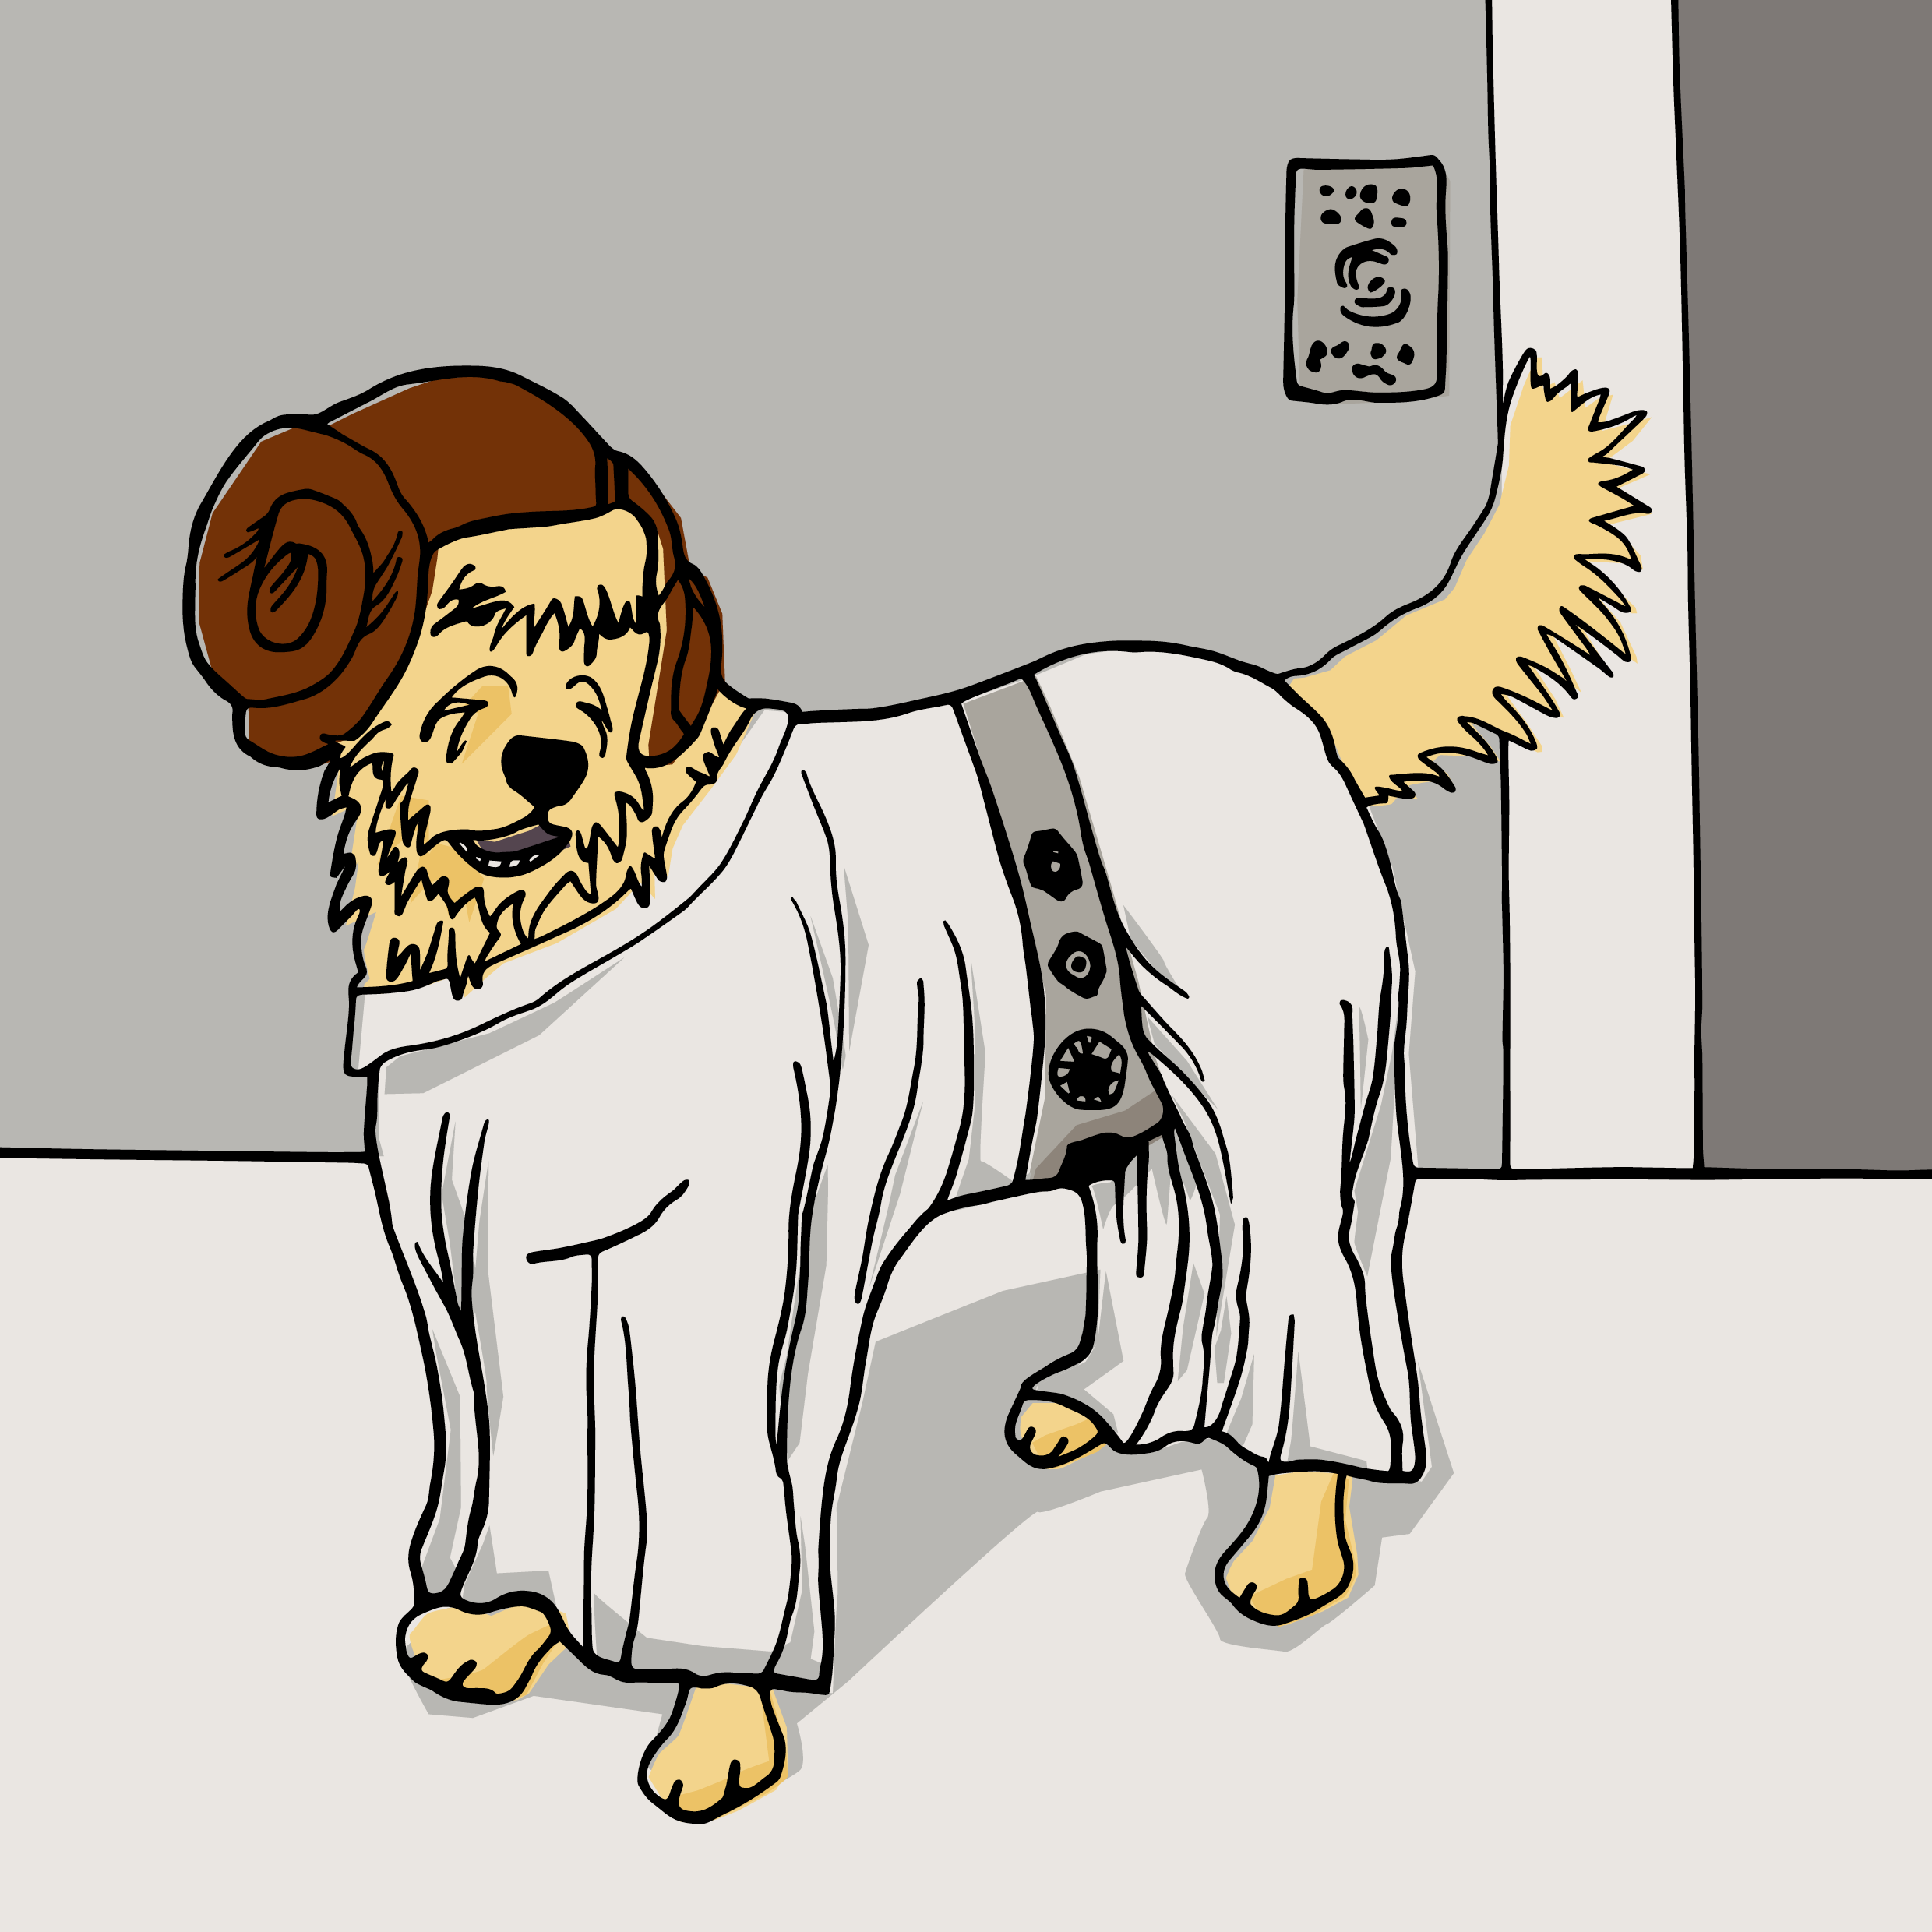 Star-wars-illustration-helene-uhl-dogs-in-costumes-series.png